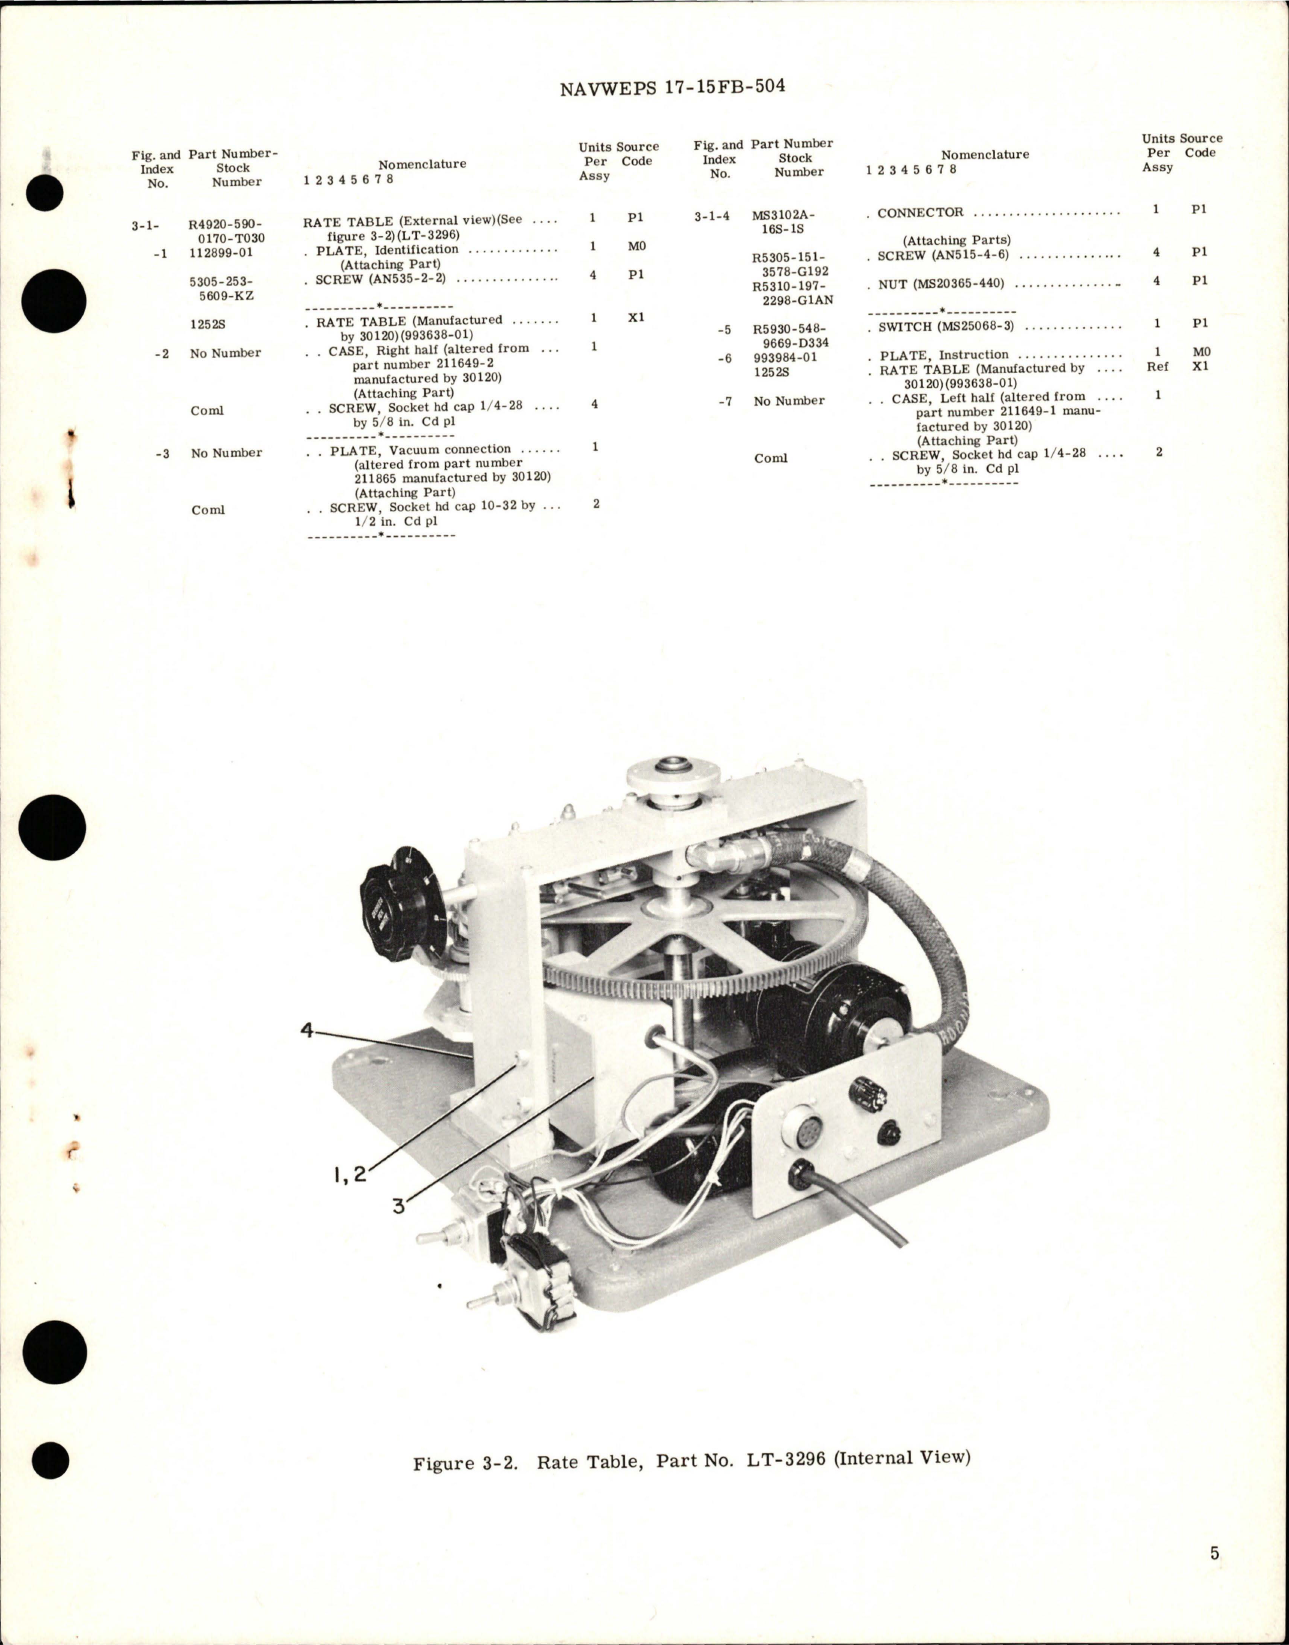 Sample page 5 from AirCorps Library document: Operation, Service and Overhaul Instructions with Parts Breakdown for Rate Table Stock R4920-590-0170-TO30 - Part LT-3296 